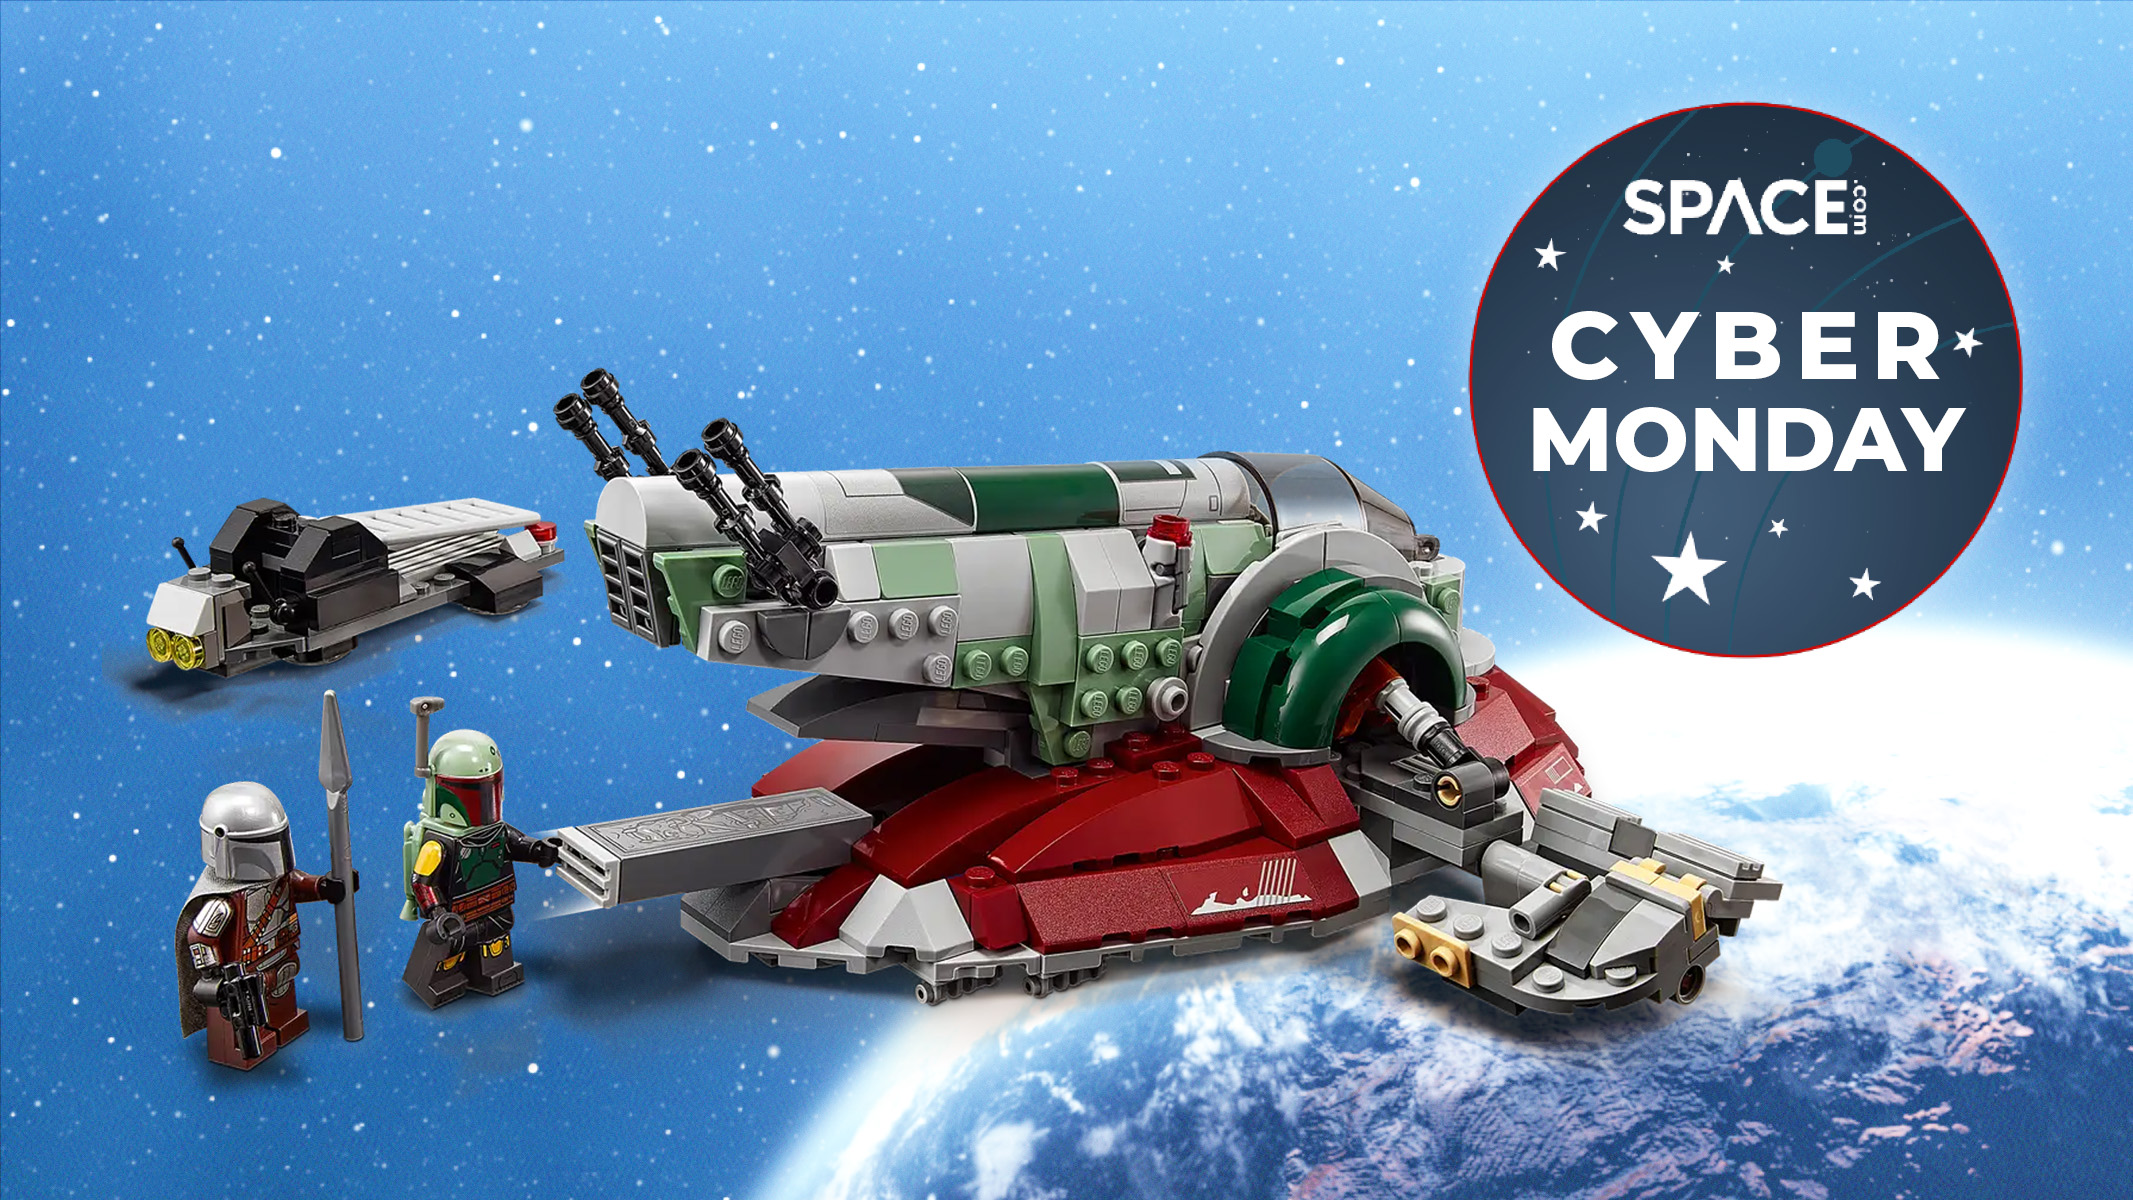 Lego Star Wars Boba Fett’s Starship is cheaper than ever this Cyber Monday Space